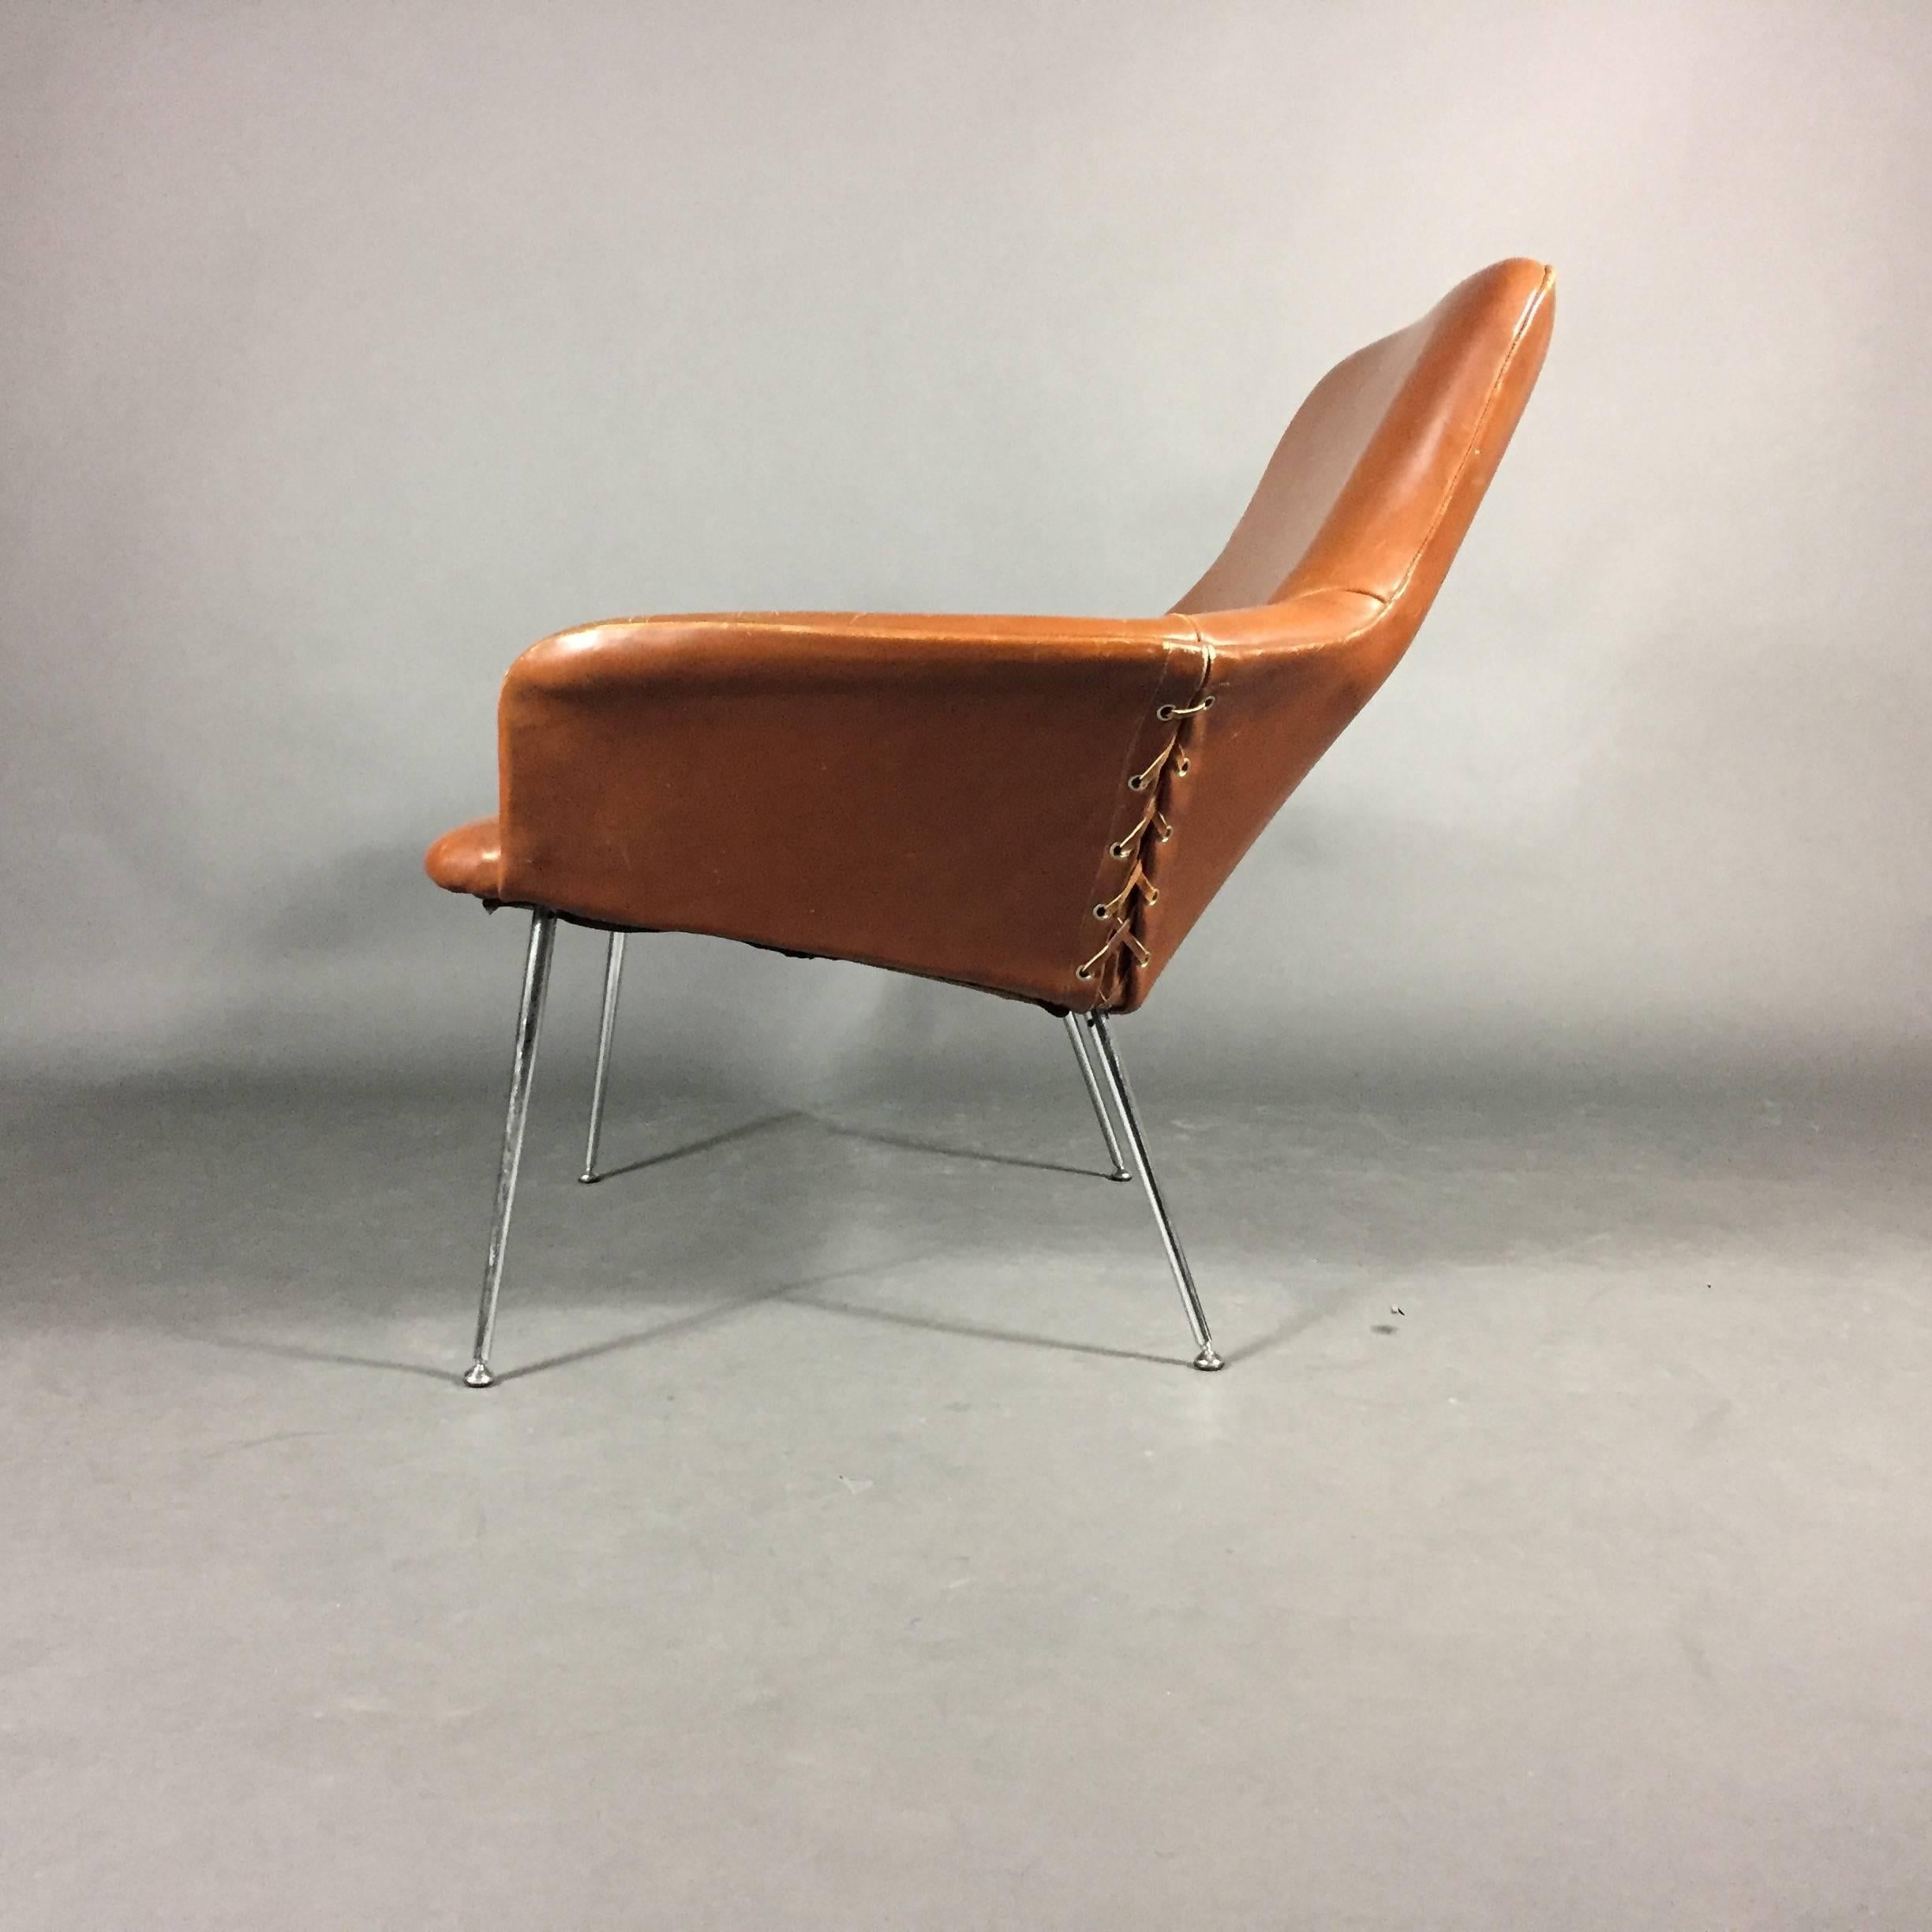 A very sexy and rare example of chair design by Poul Nørreklit with tightly stitched leather over chromed steel frame. Wide-set seat with side lacing is exceptional. Designed 1964 for A. Leidersdorffsen A/S, Denmark.